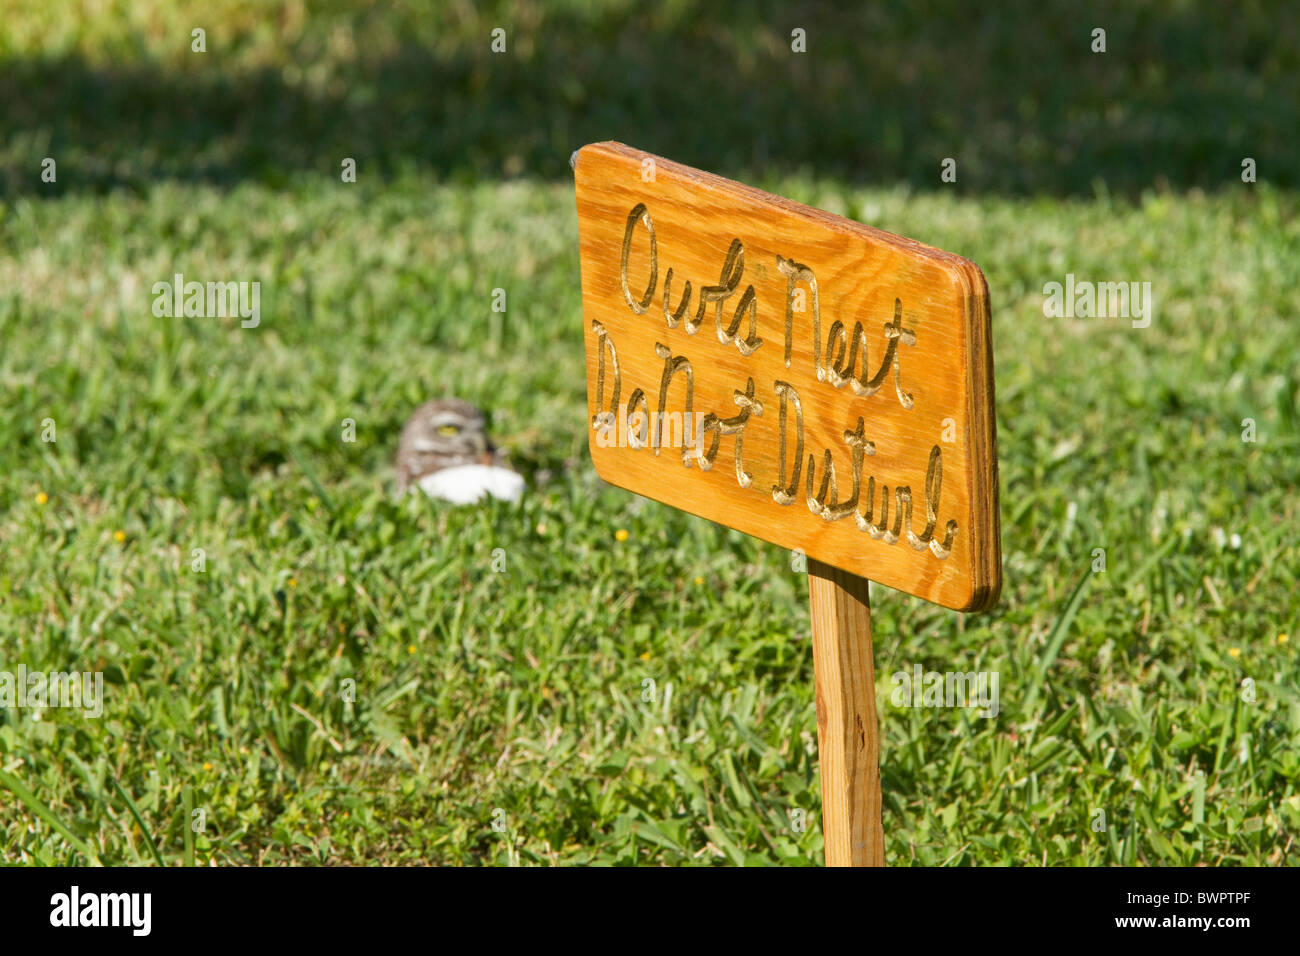 Burrowing owl sign that warns of owl nest and to not disturb ,in suburban habitat in Florida Keys. Stock Photo